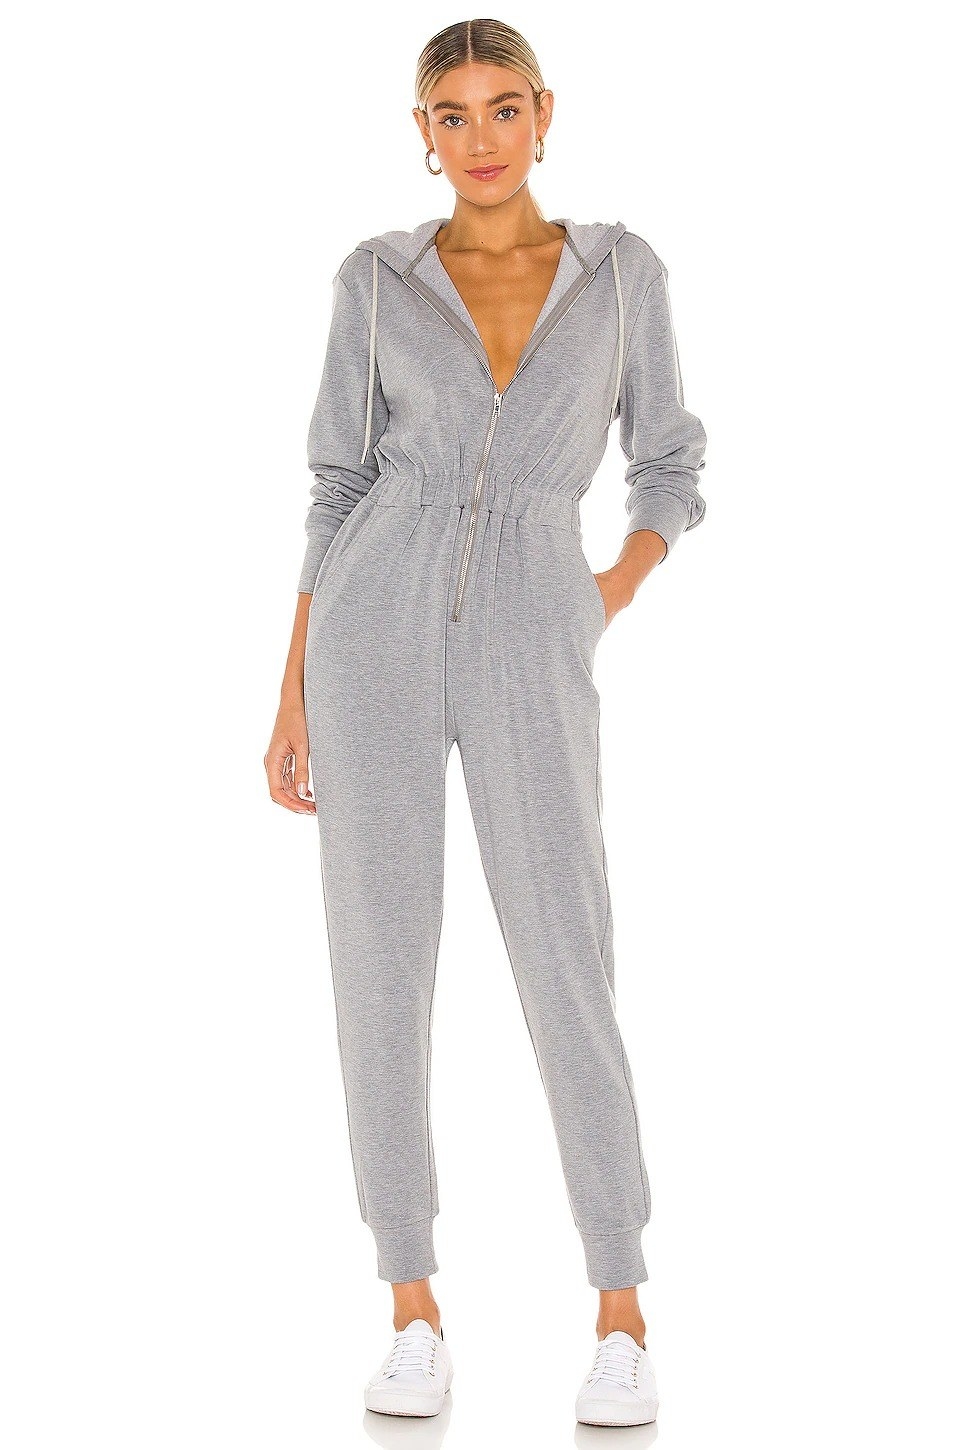 Model wearing gray jumpsuit cuffed at the ankle with an elastic band and silver zipper